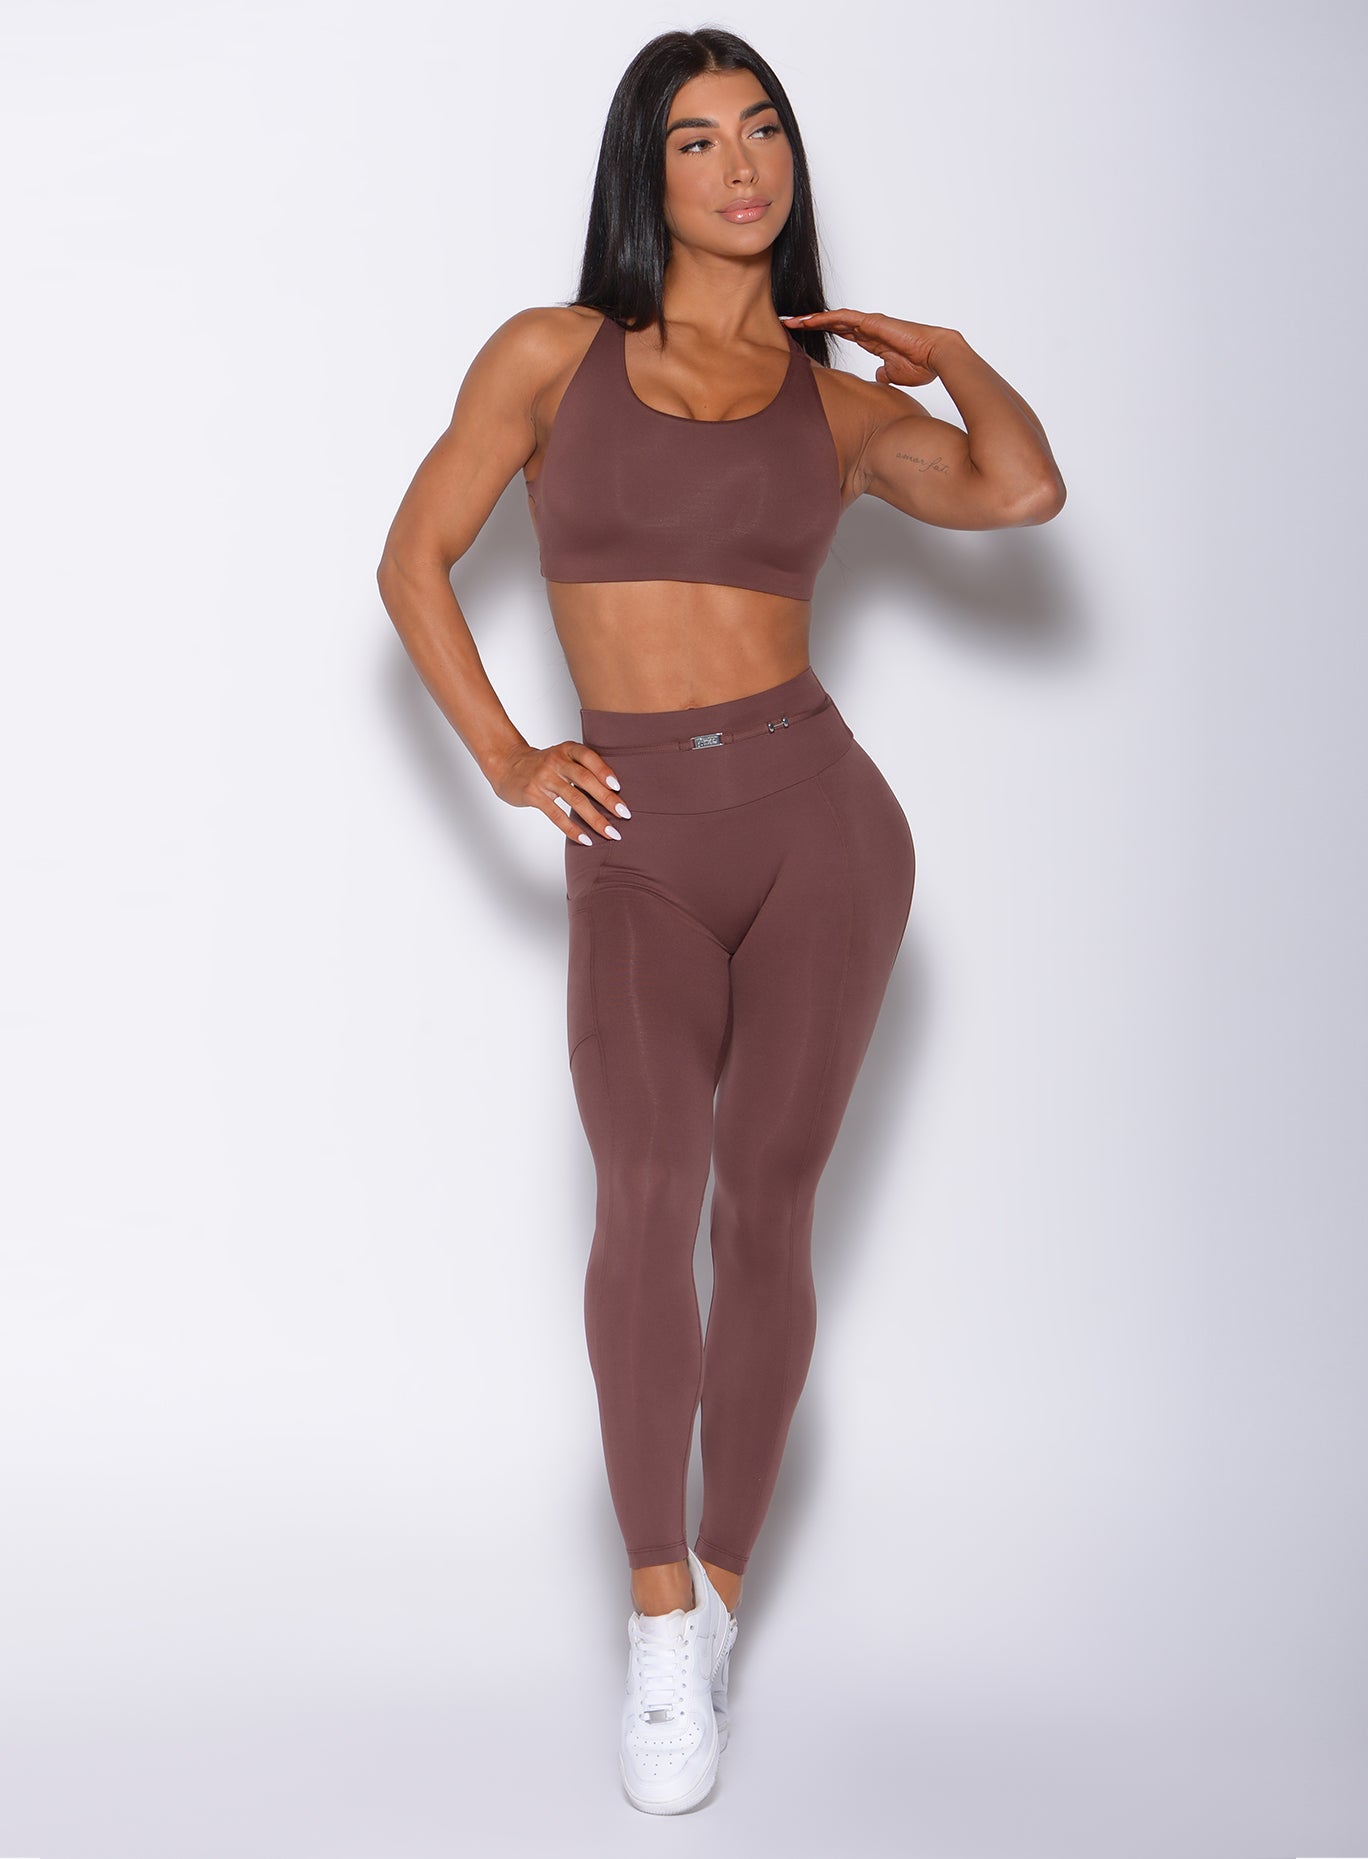 Front profile view of a model wearing our barbell leggings in chocolate color and a matching bra